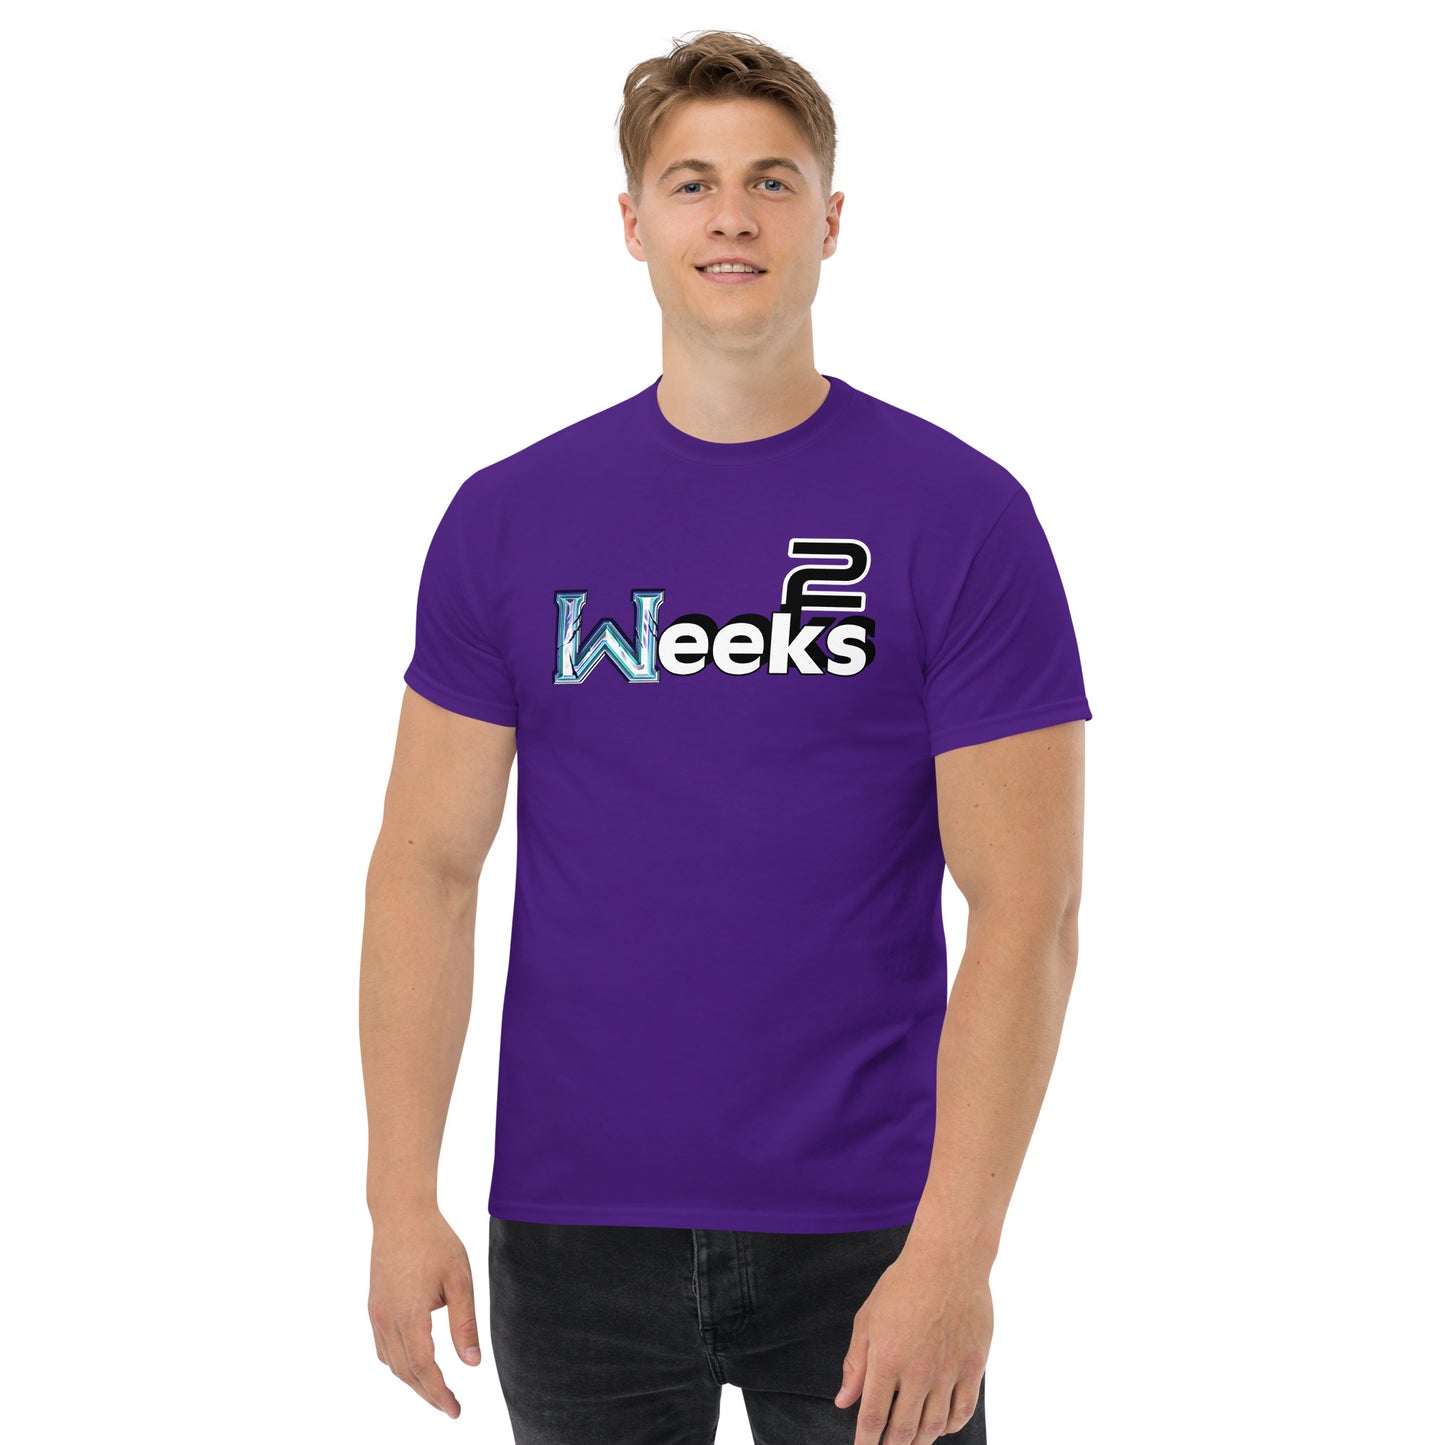 Two Weeks Men's Classic T-Shirt